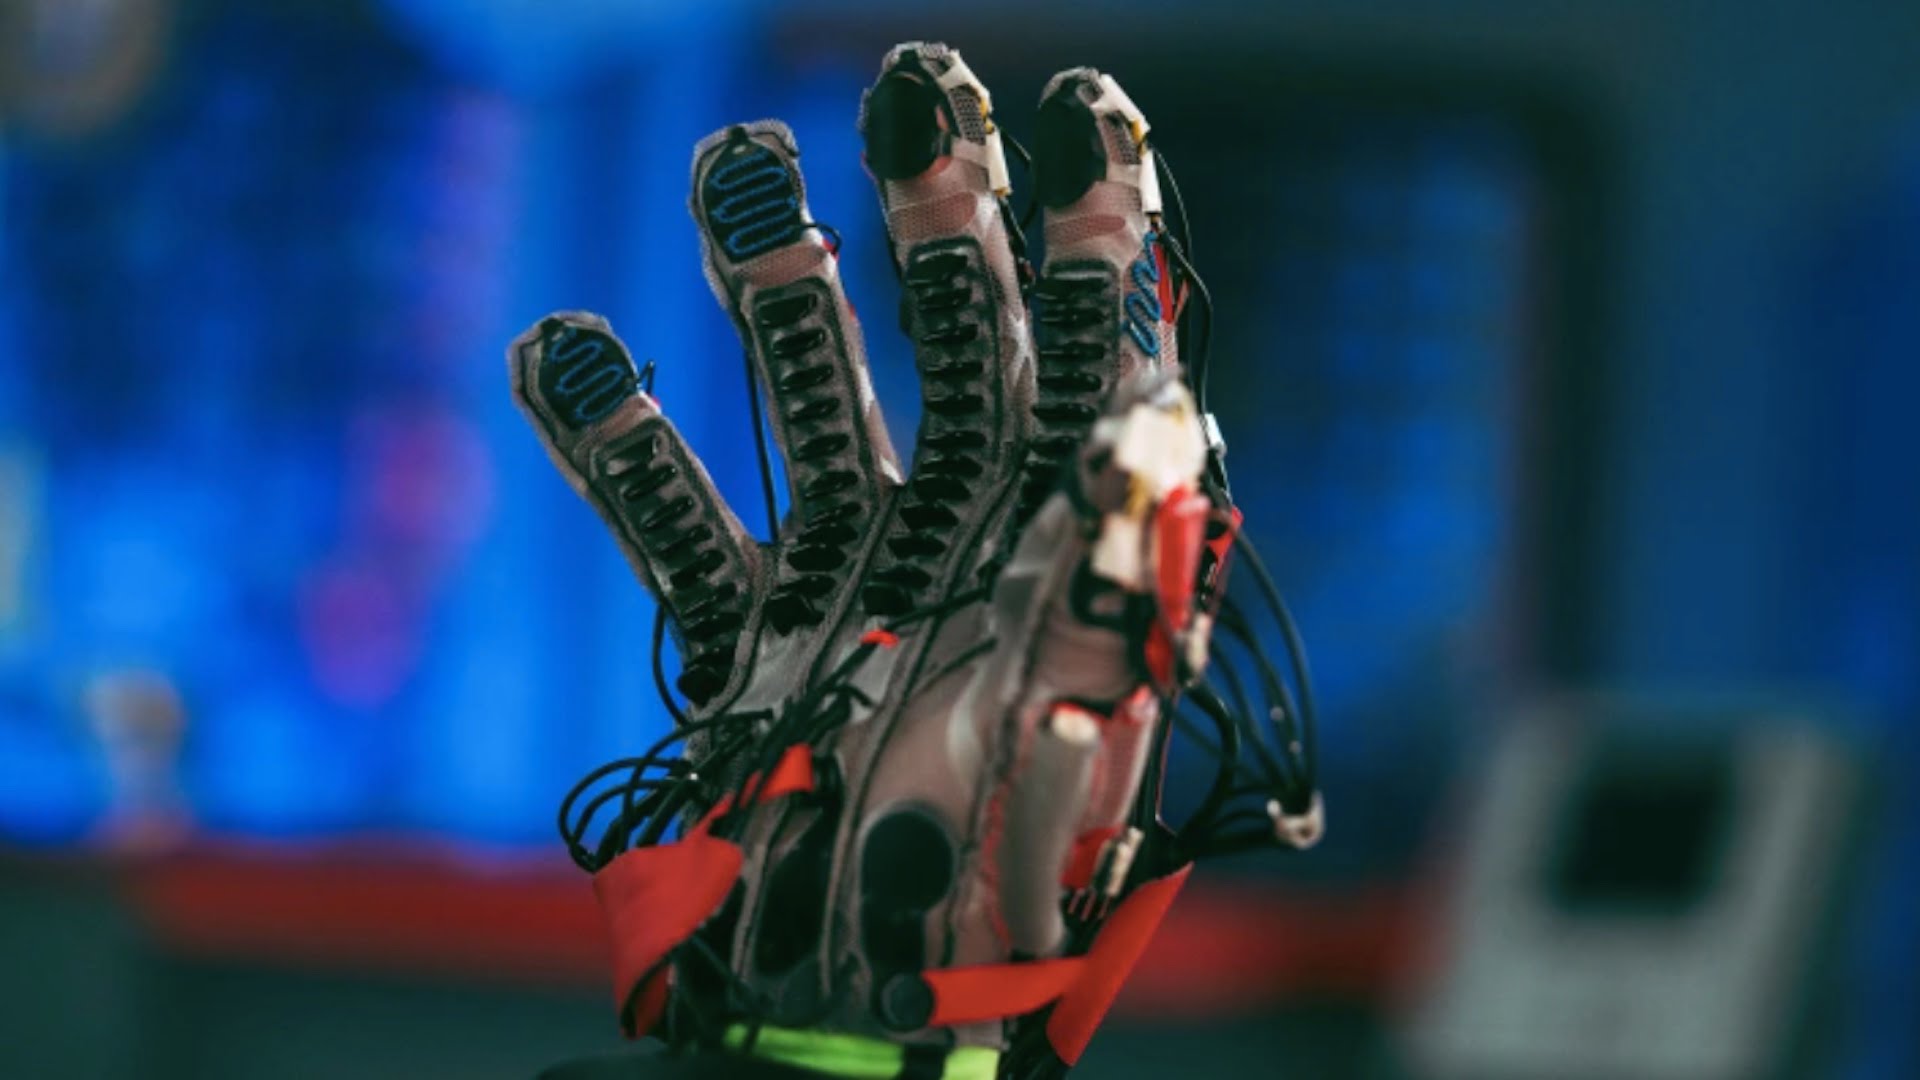 OpenXR aims to standardize “advanced haptics” for VR and AR